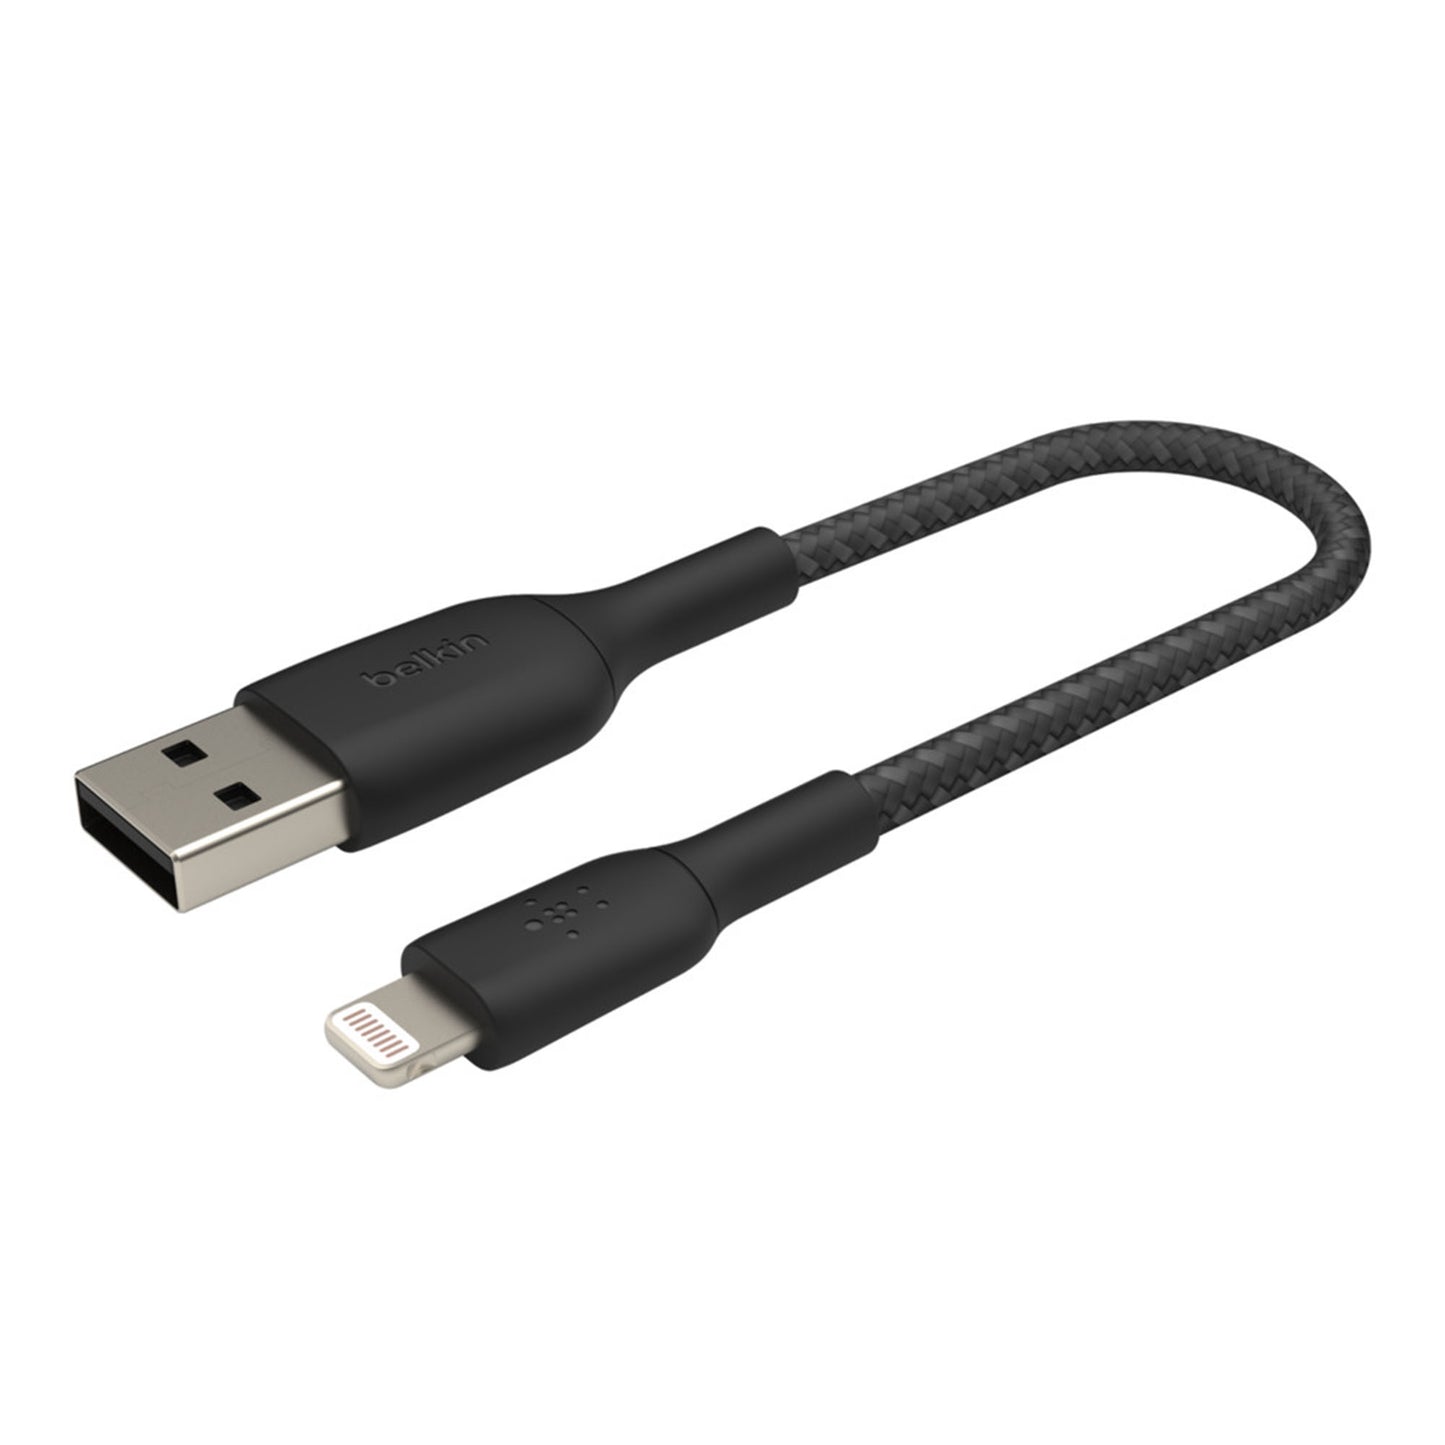 BELKIN BoostUp Charge Braided Lightning Cable 0.15m - Black